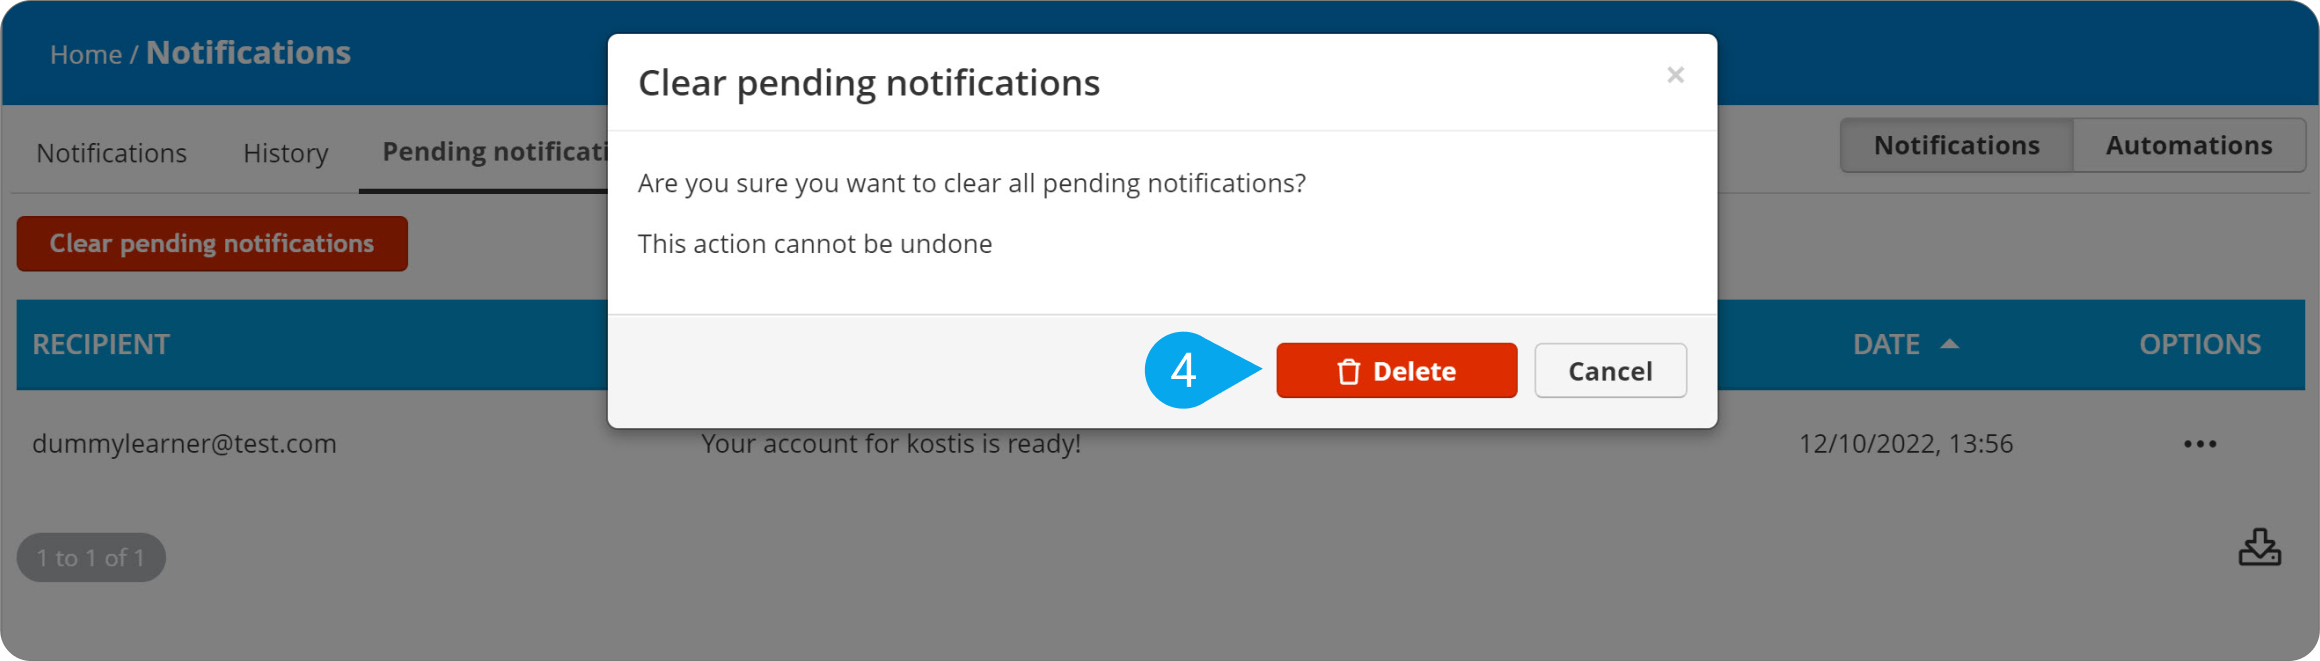 Clear_pending_notifications_confirm.png